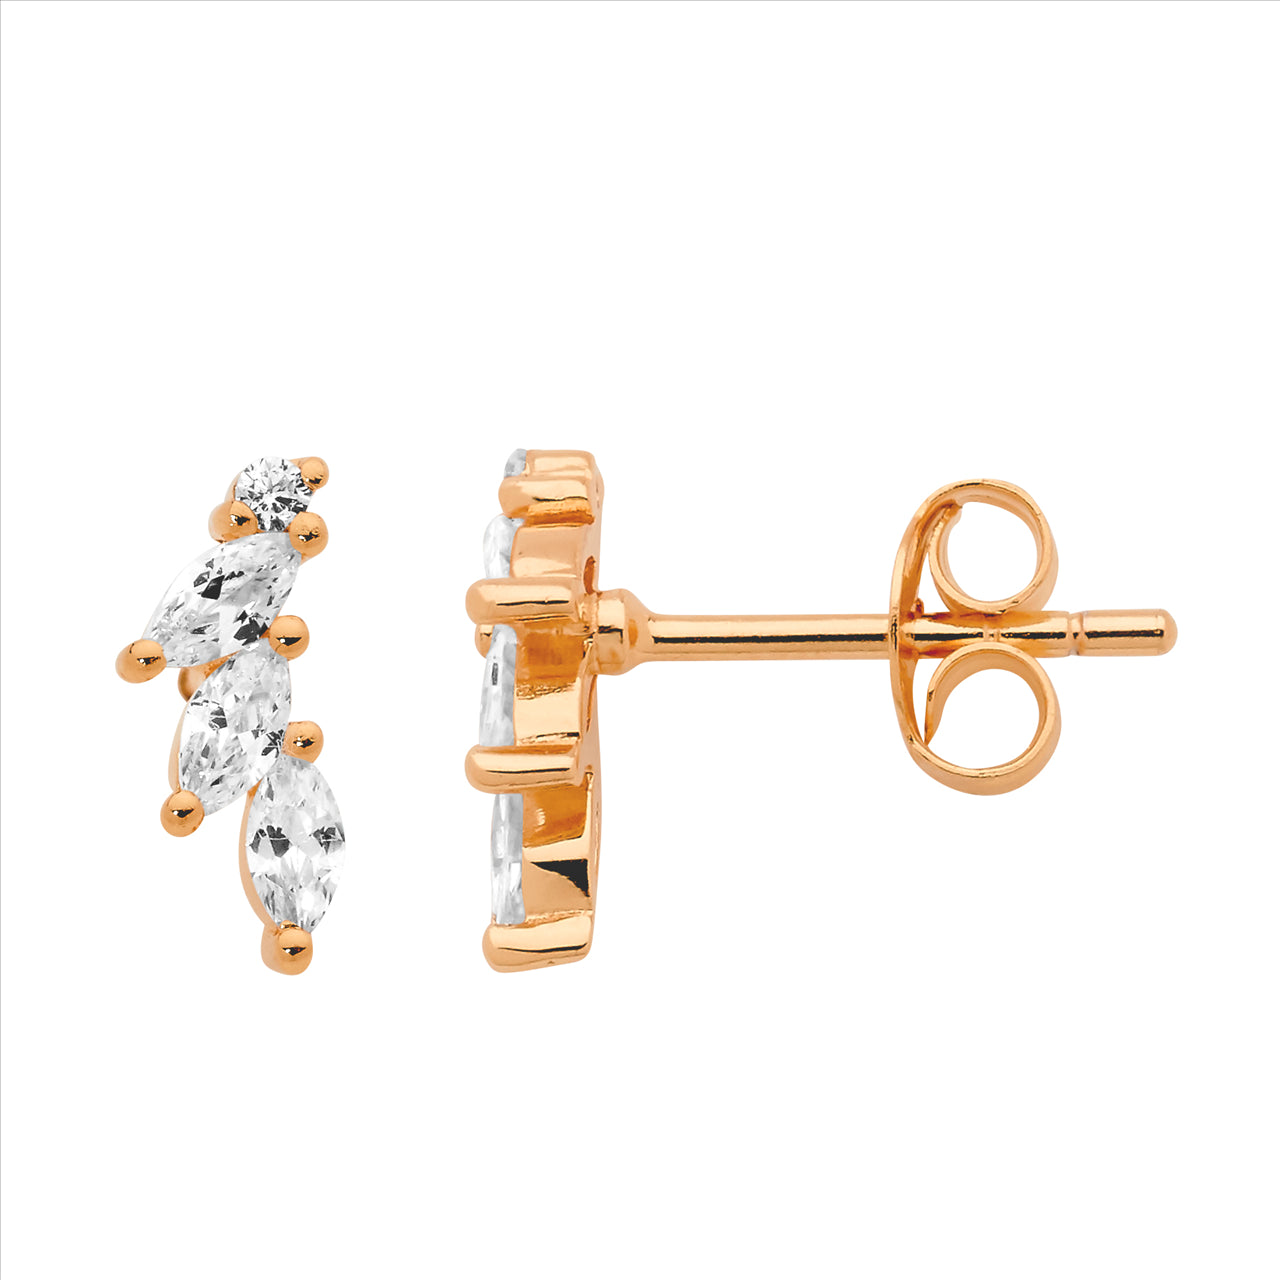 Ellani Sterling Silver & Cubic Zirconium Stud Earrings With Rose Gold Plating